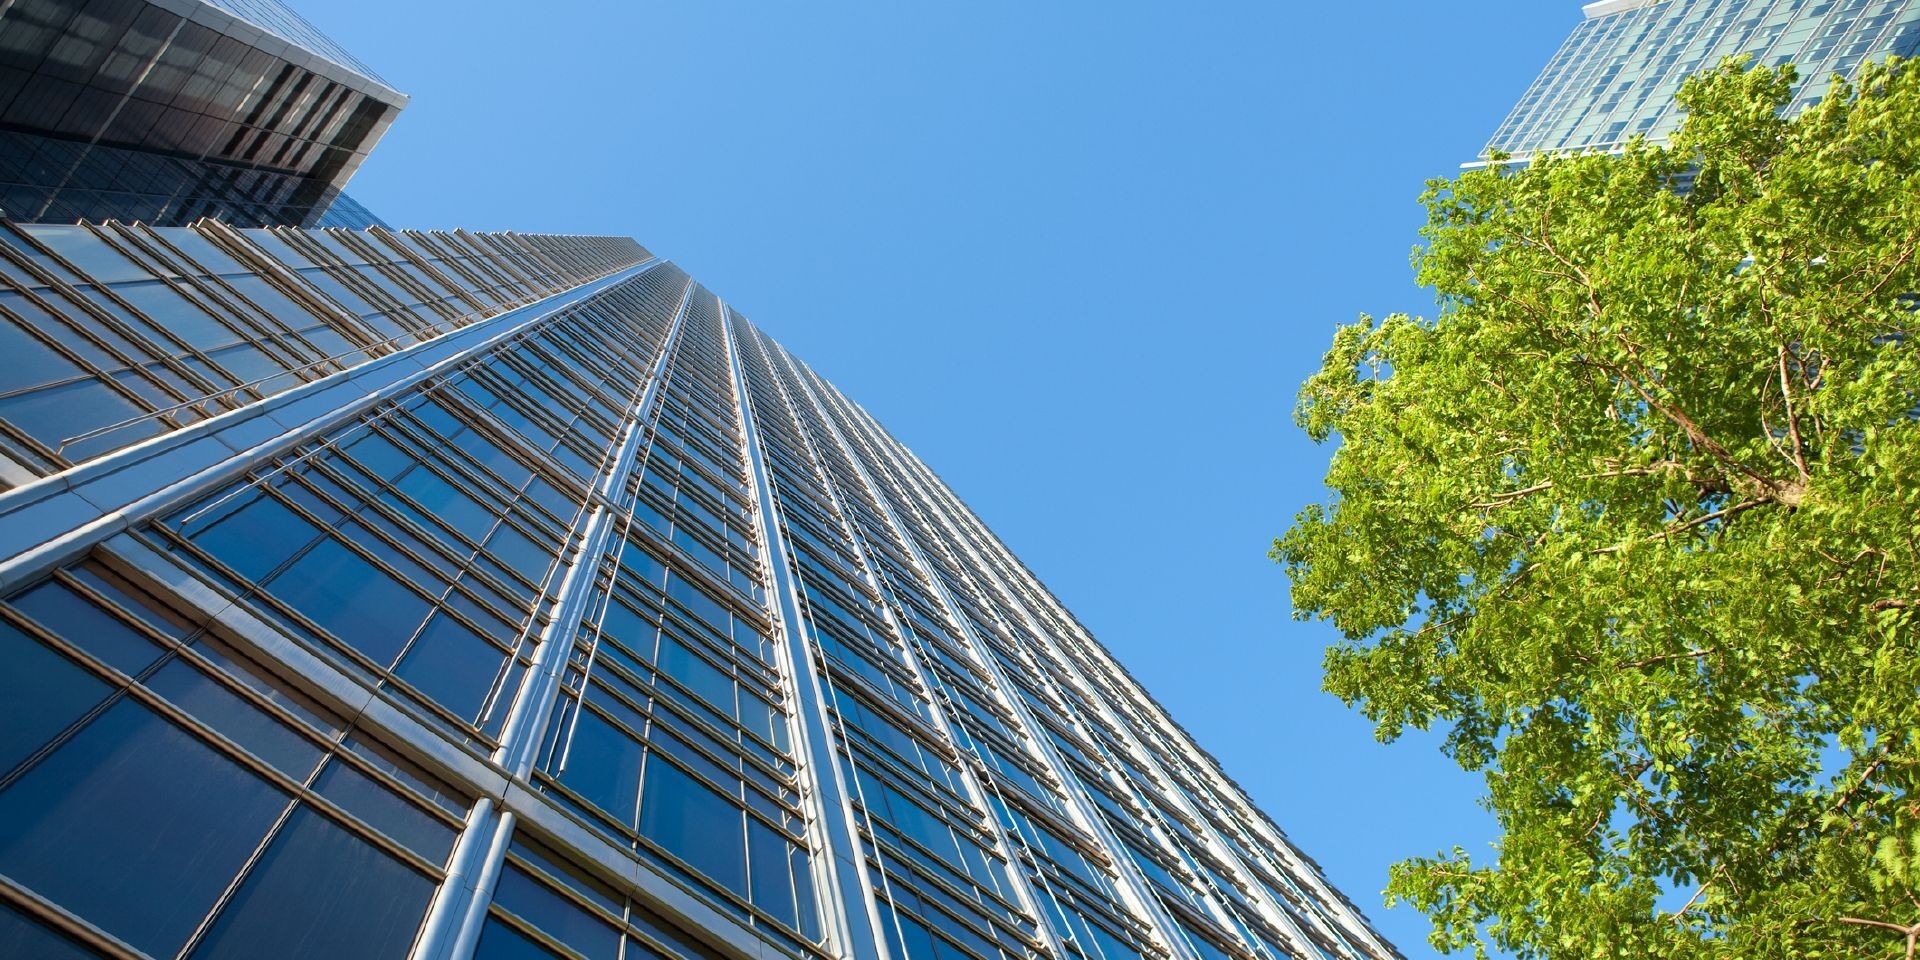 LEED and BREEAM as methods to assess a green building